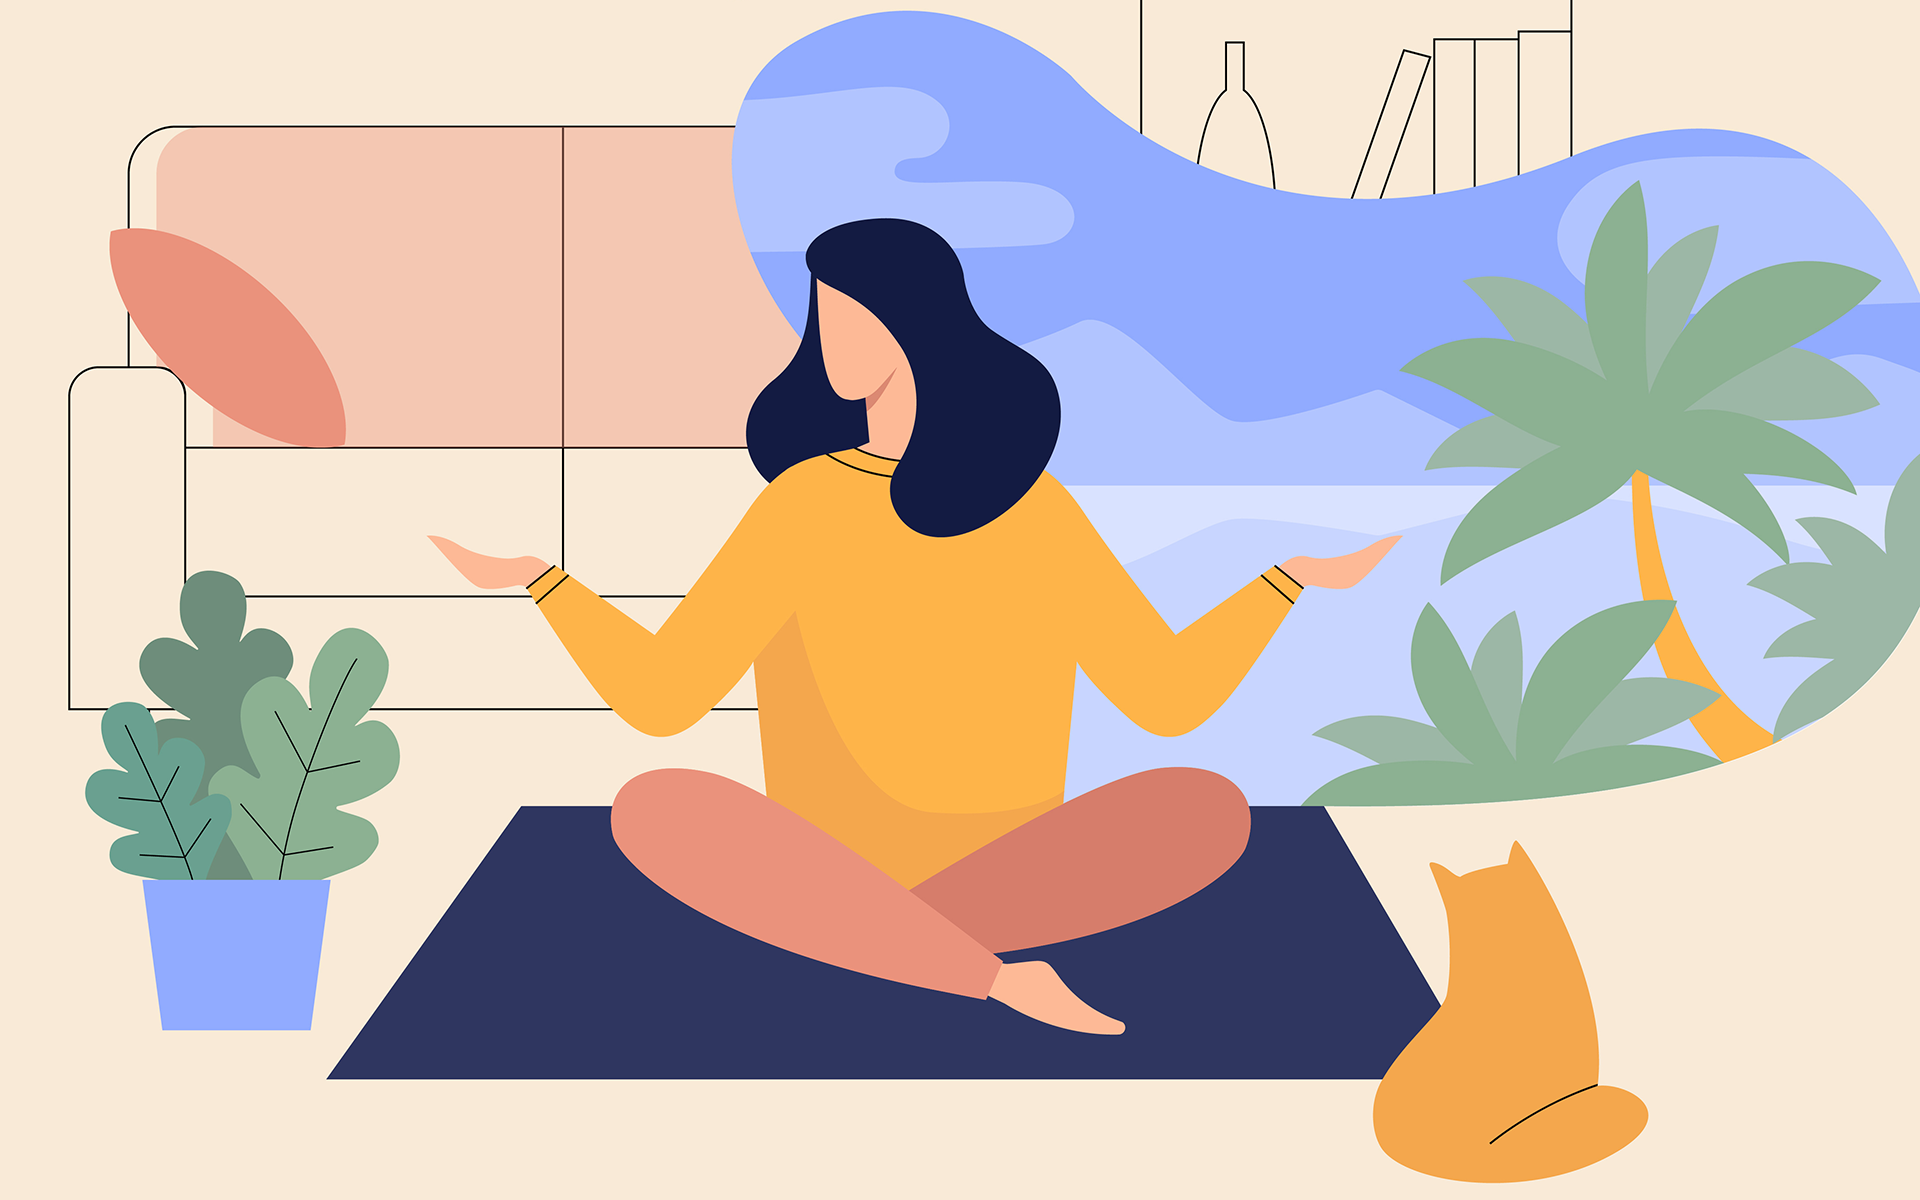 Illustration of a woman sitting cross-legged on a yoga matt in her living room with a cat by her feet. She's imagining a tropical beach.